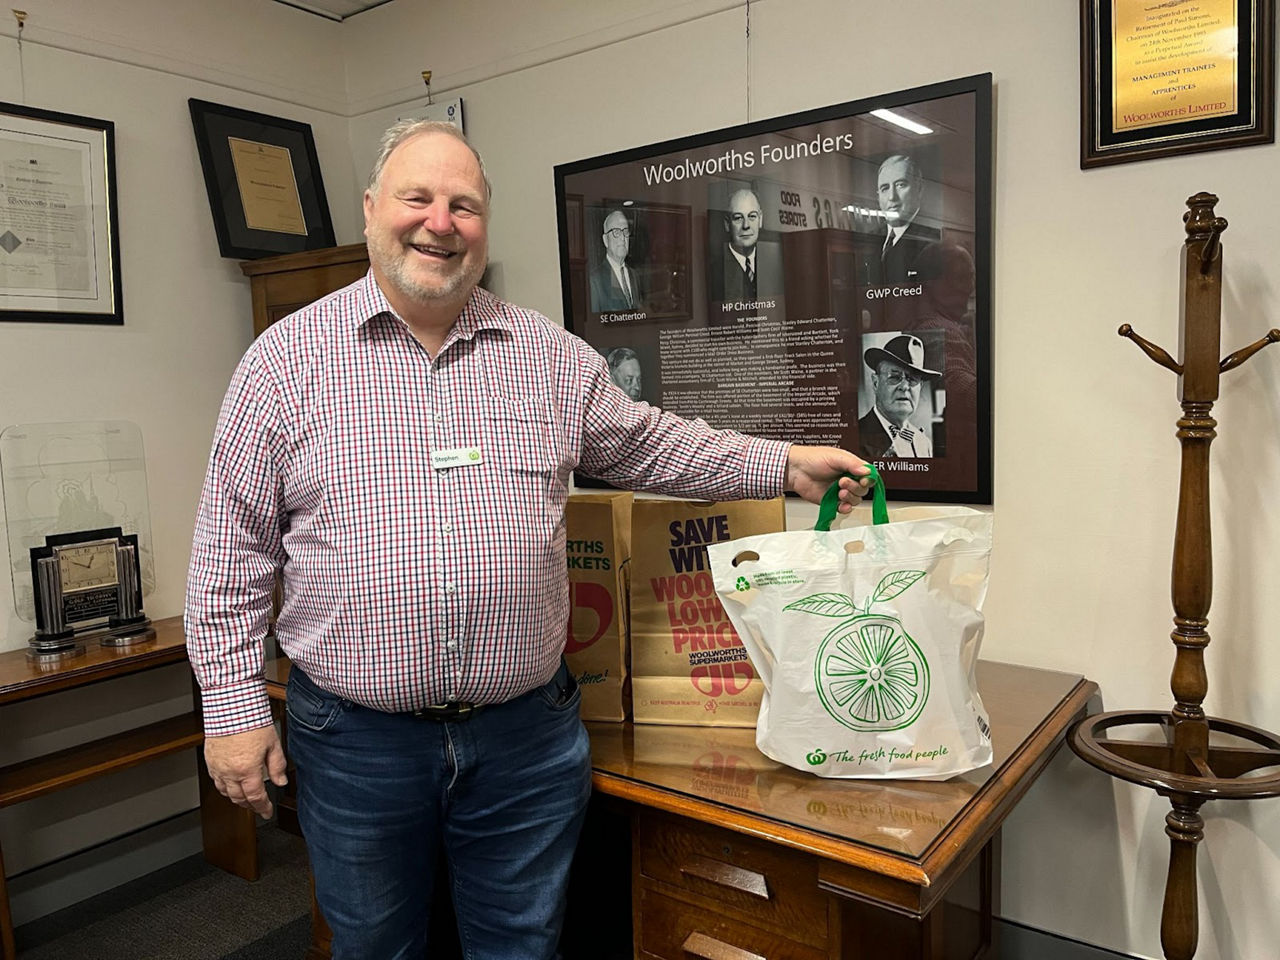 Woolworths Historian Stephen Ward inducting a soft plastic shopping bag into the Woolworths archives